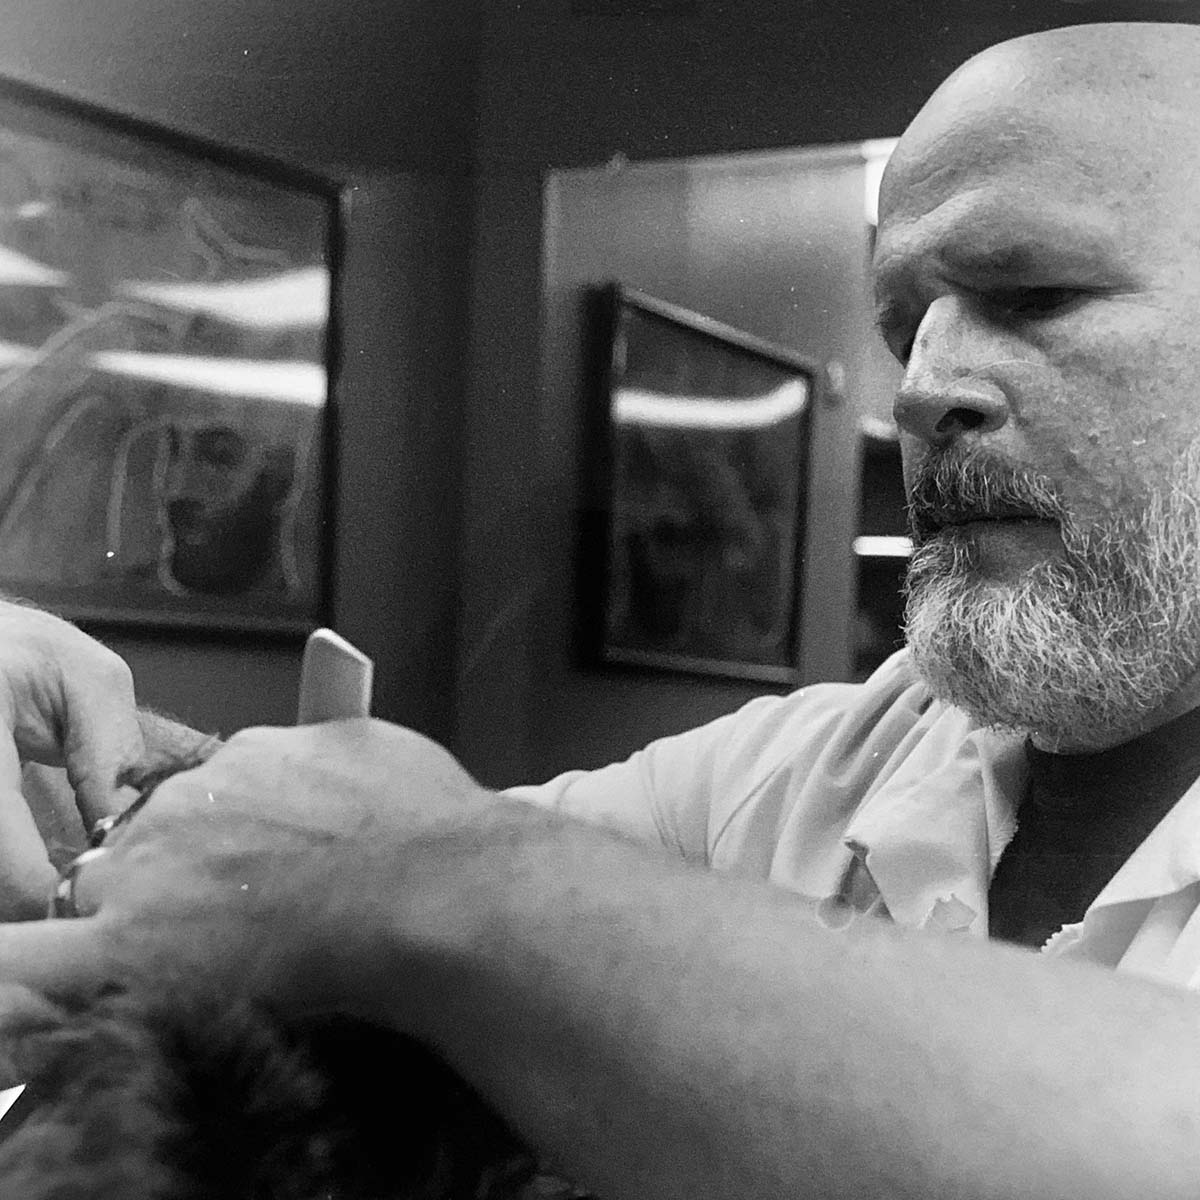 image of a barber cutting hair